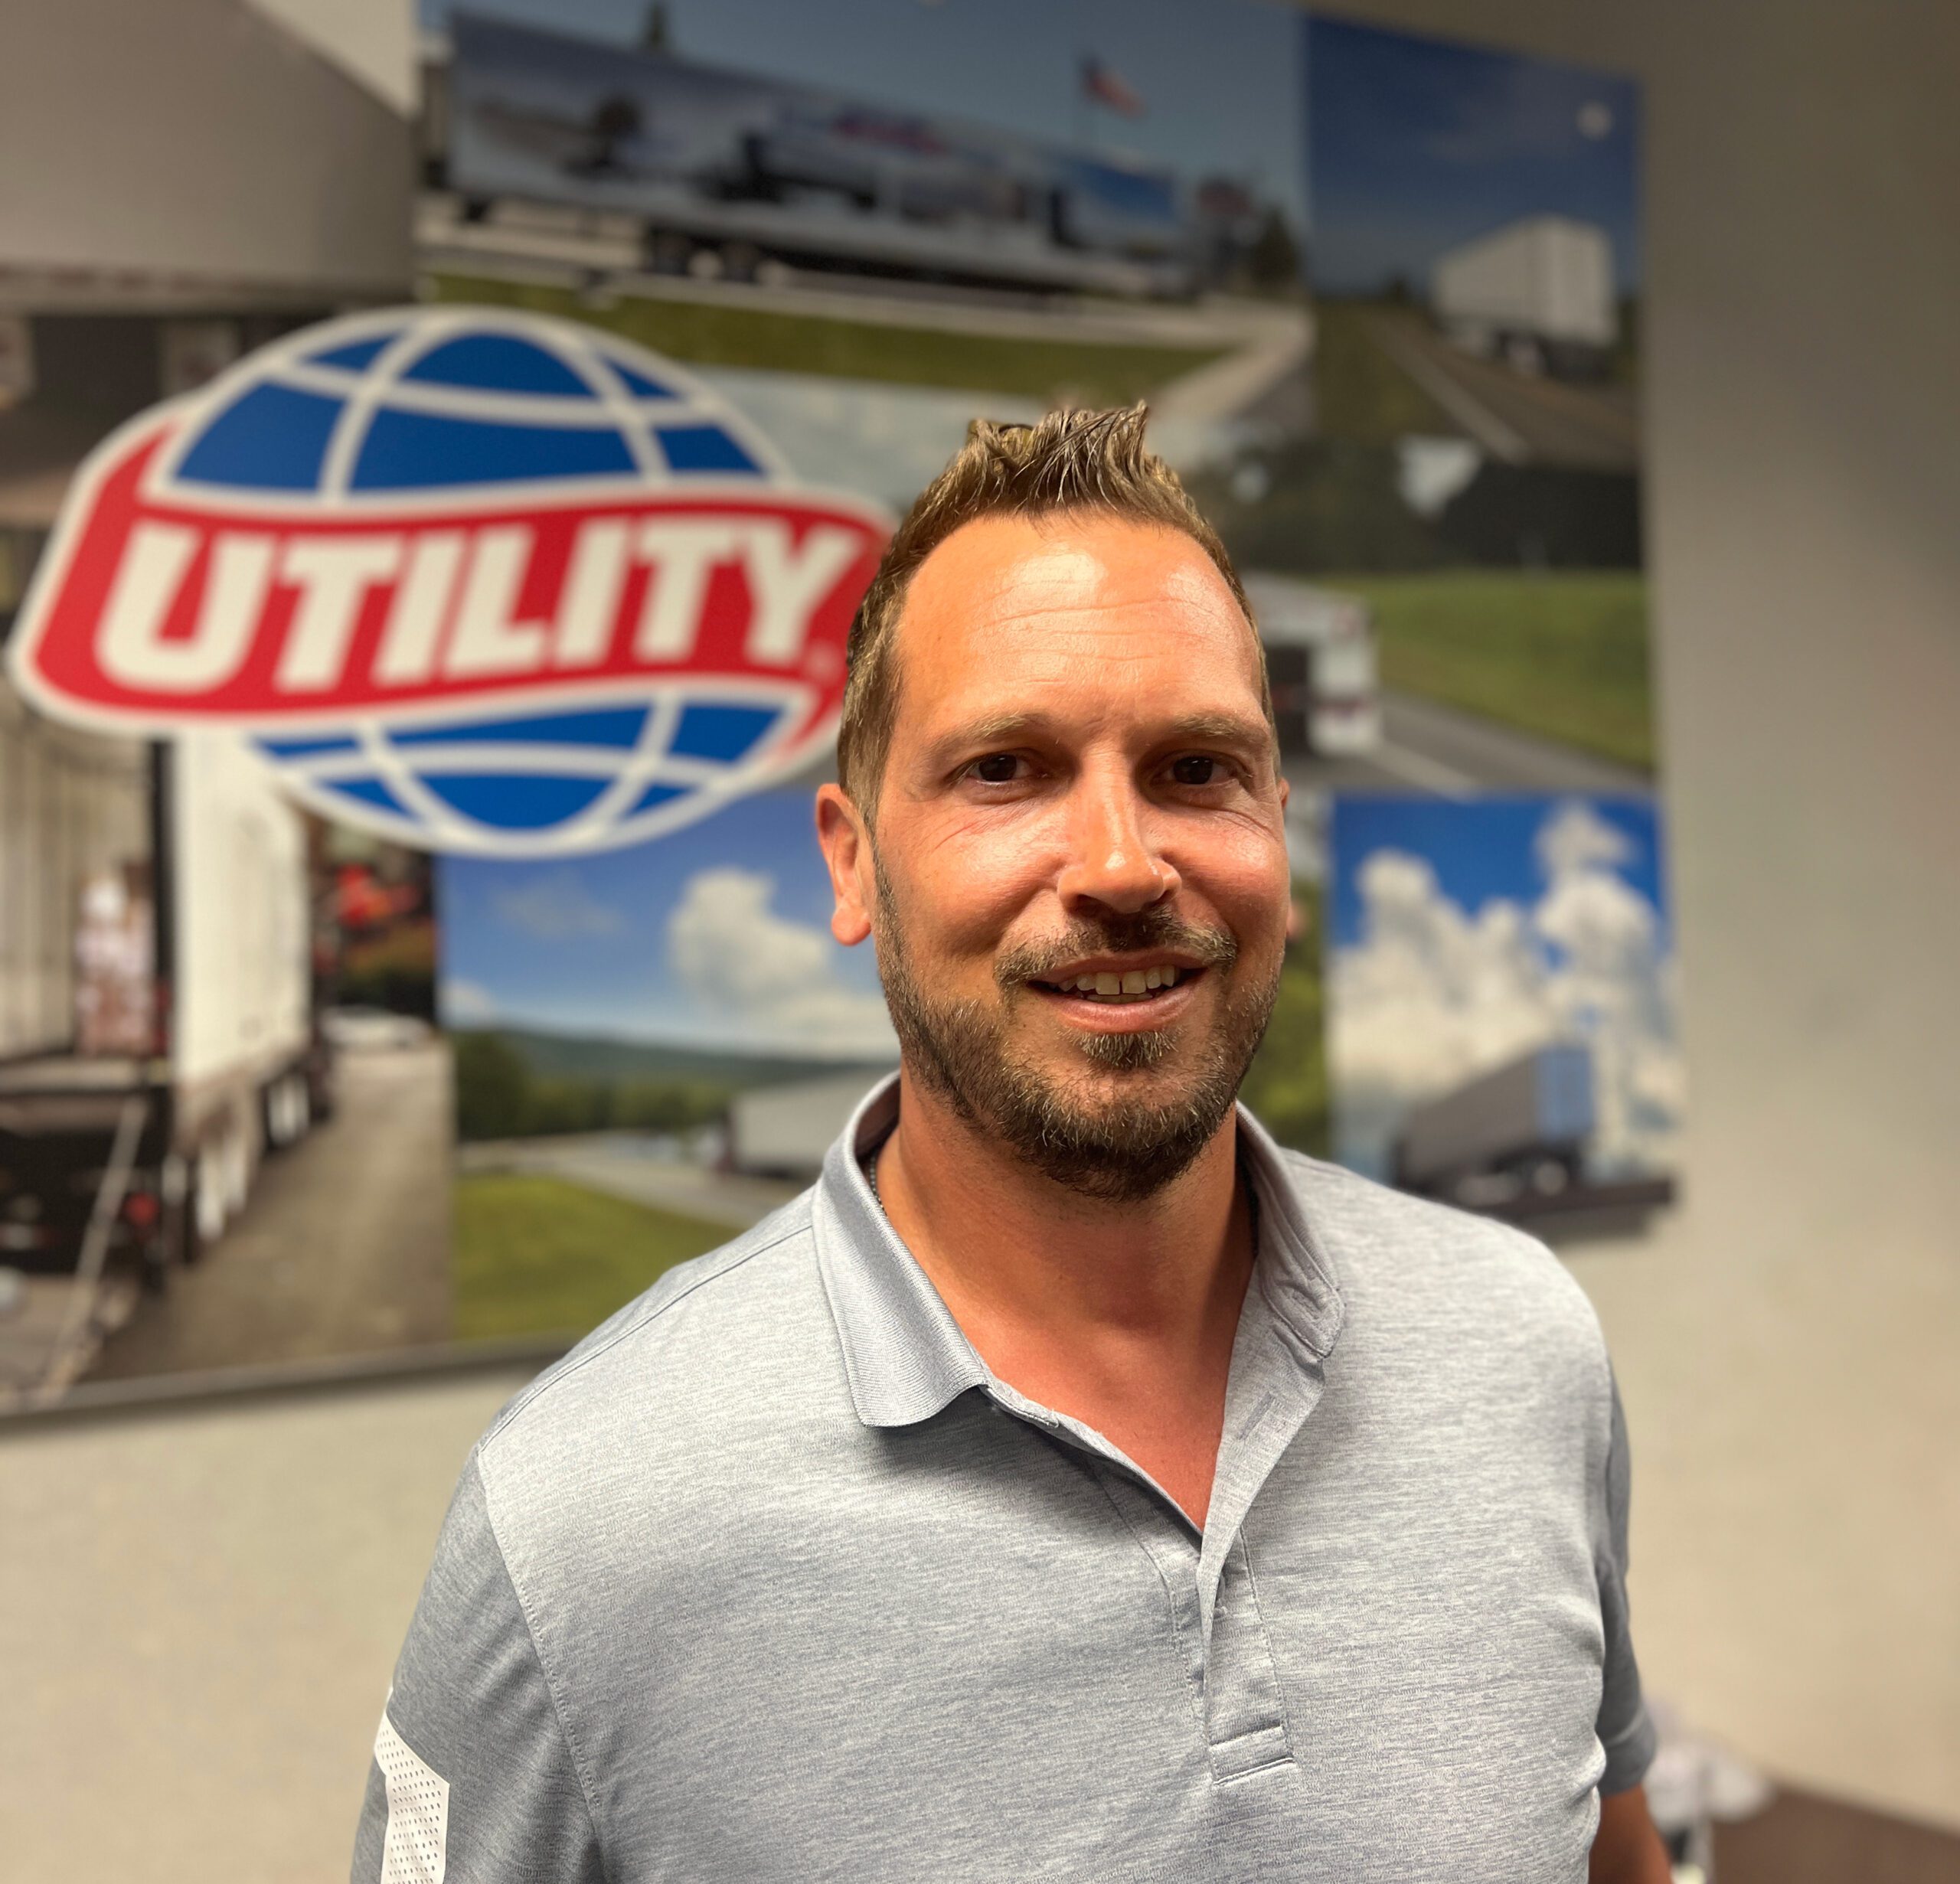 Matt Gerstenslager joins Utility Trailer Manufacturing Company in New Role